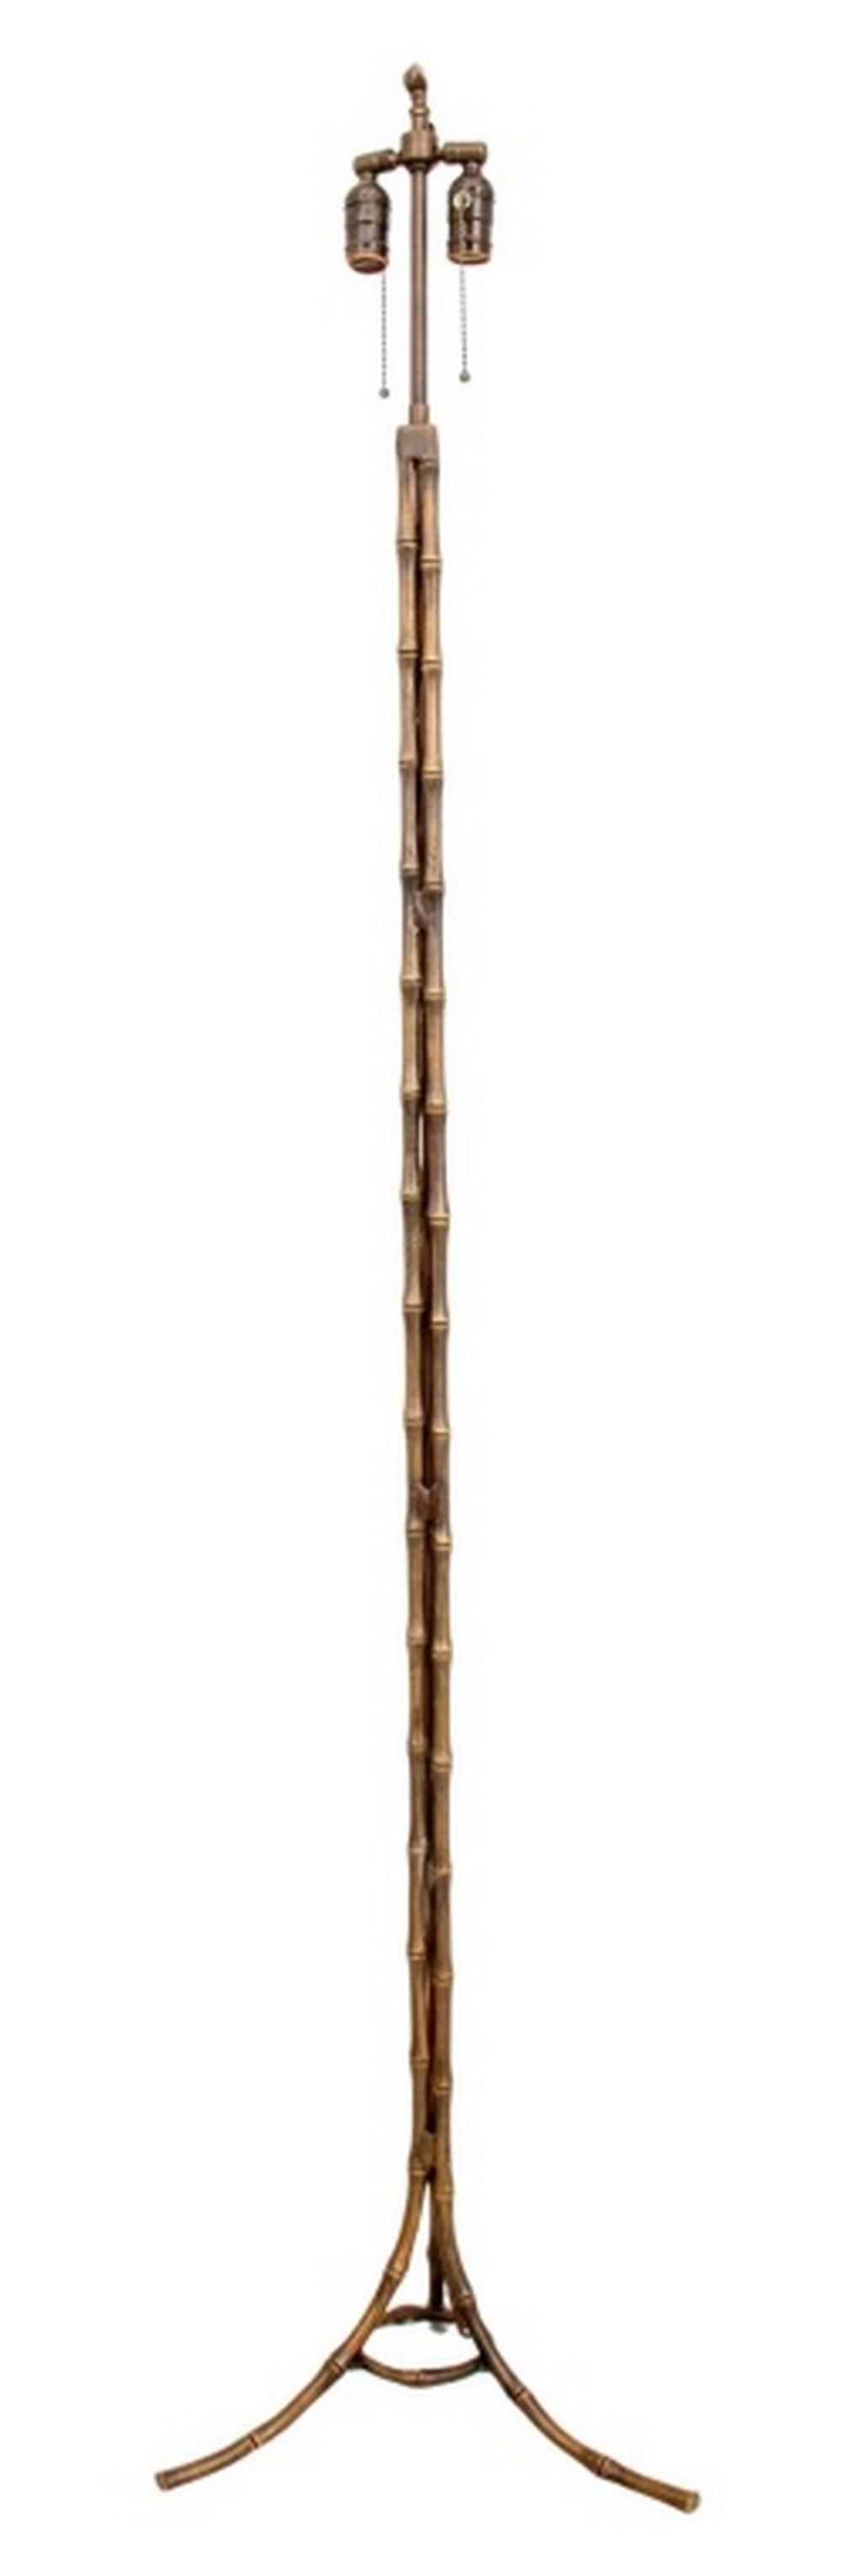 CHINOISERIE BRONZE BAMBOO FORM 3cea69